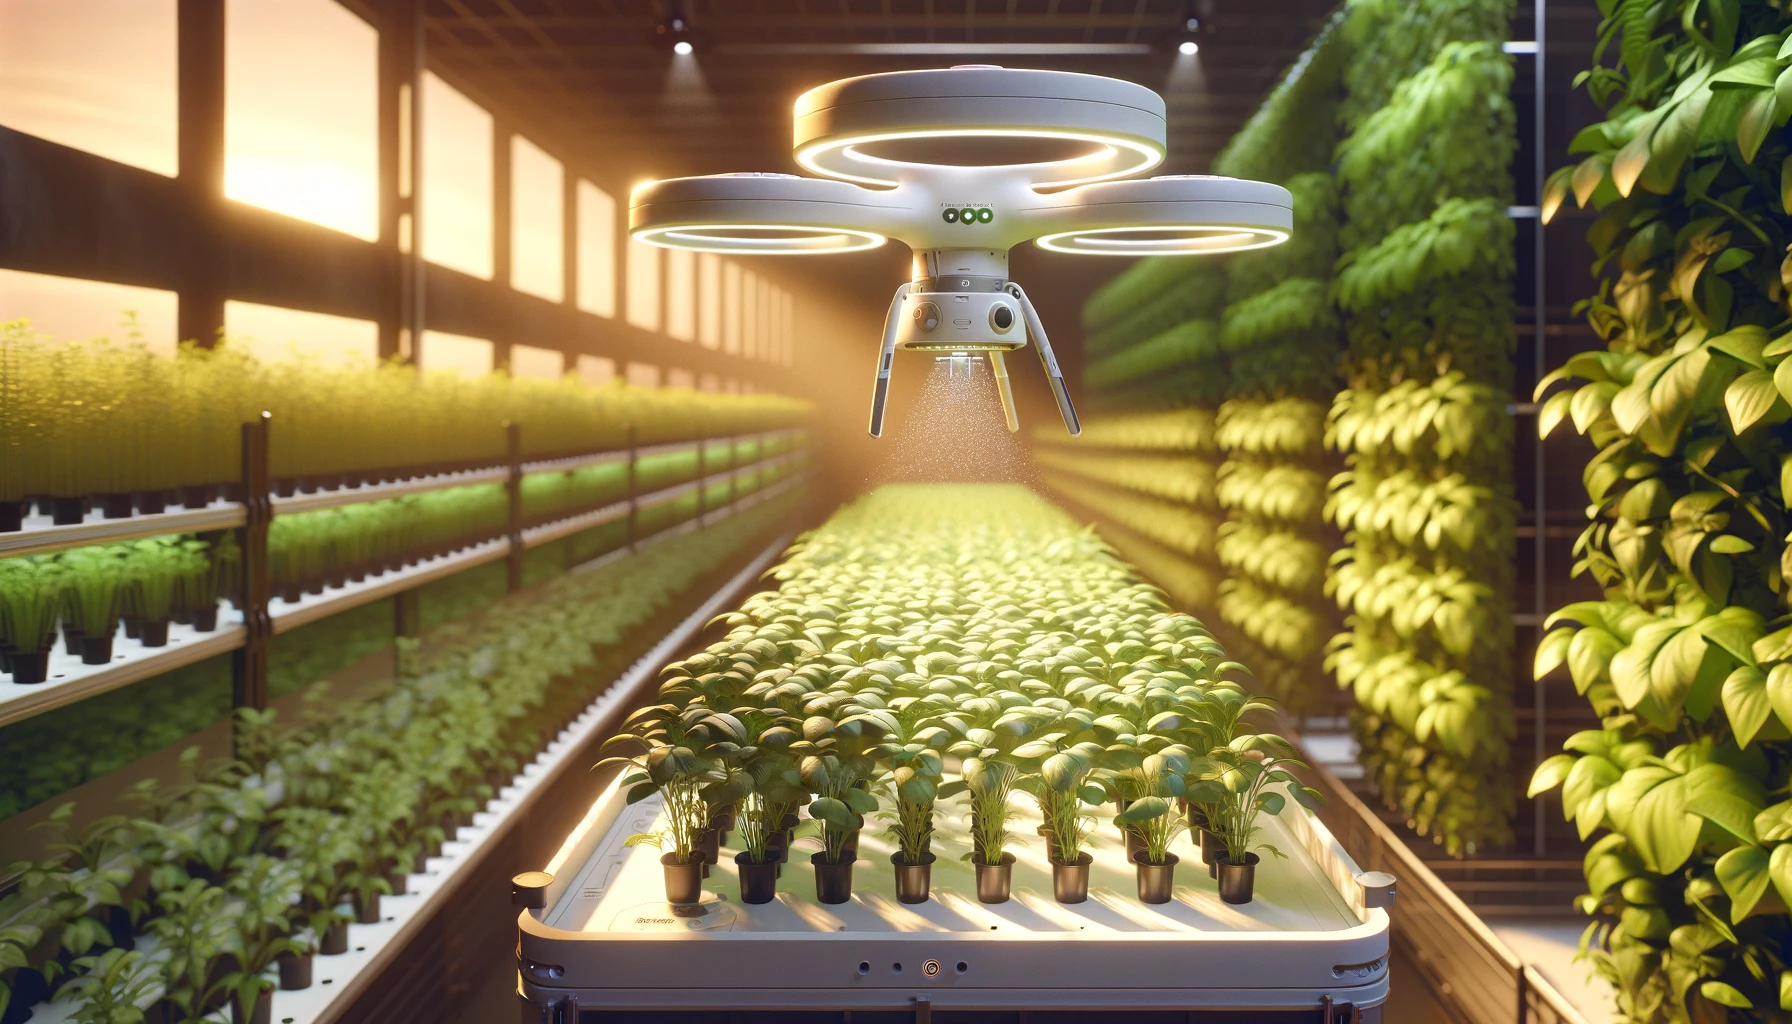 Futuristic drone caring for plants in a vertical farm, illustrating the role of AI in the food industry to optimize cultivation and streamline resource use.